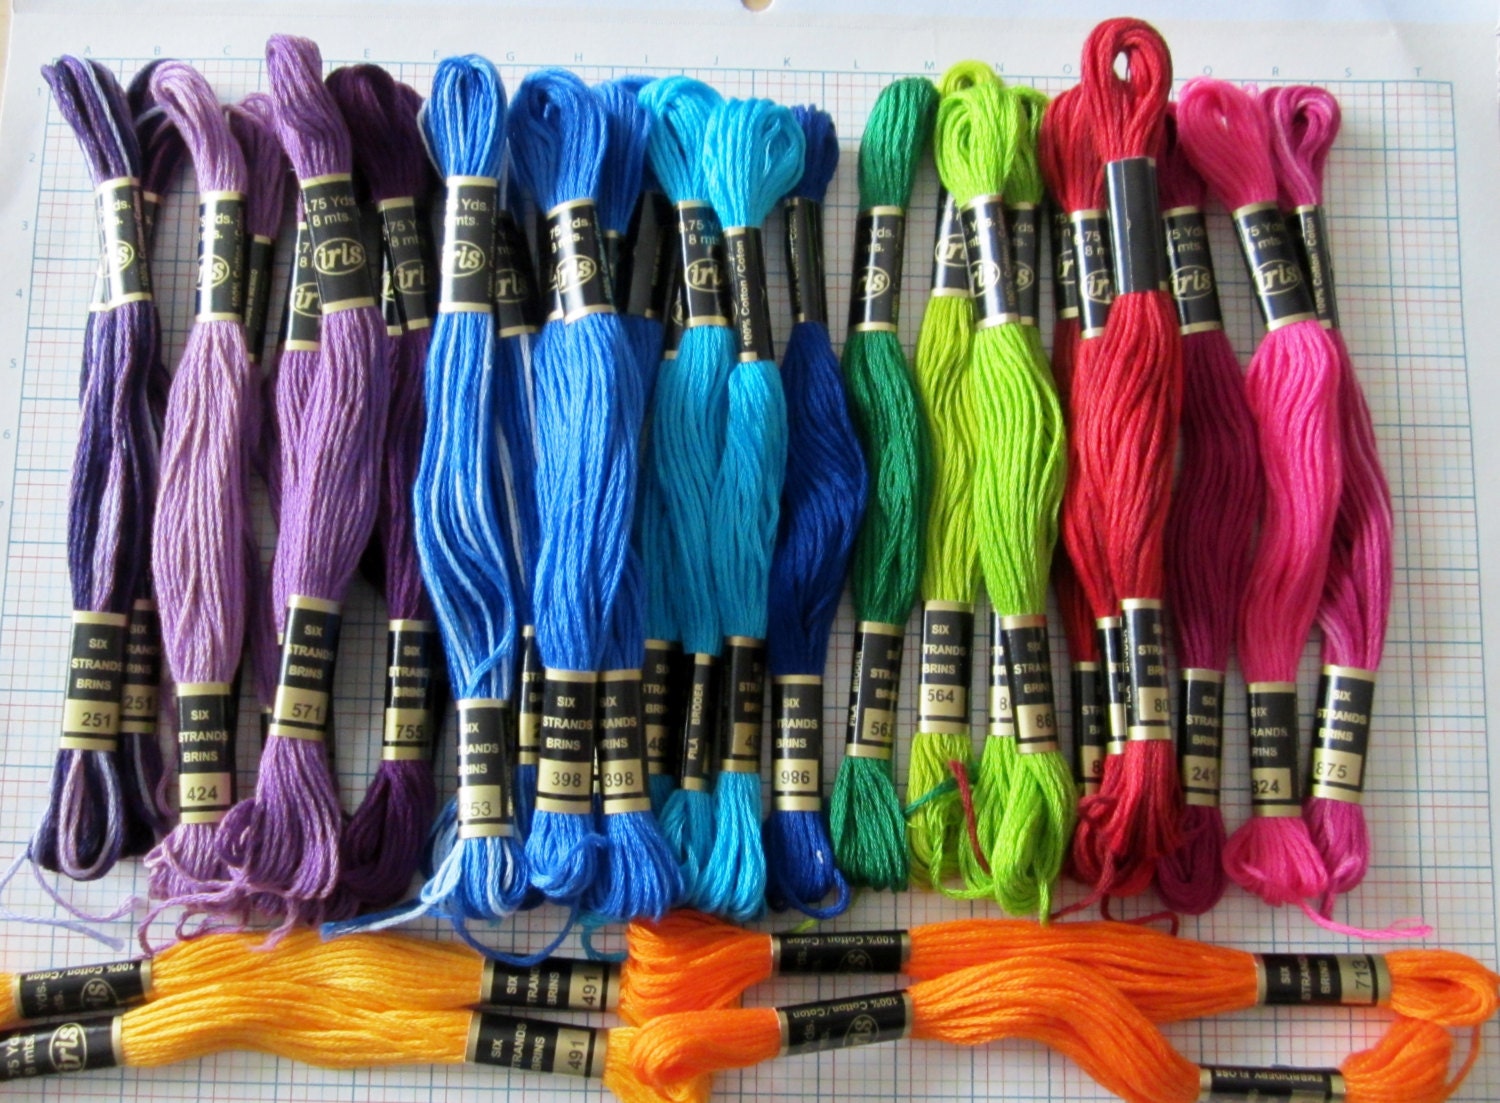 iris-brand-embroidery-thread-floss-pick-your-own-12-colour